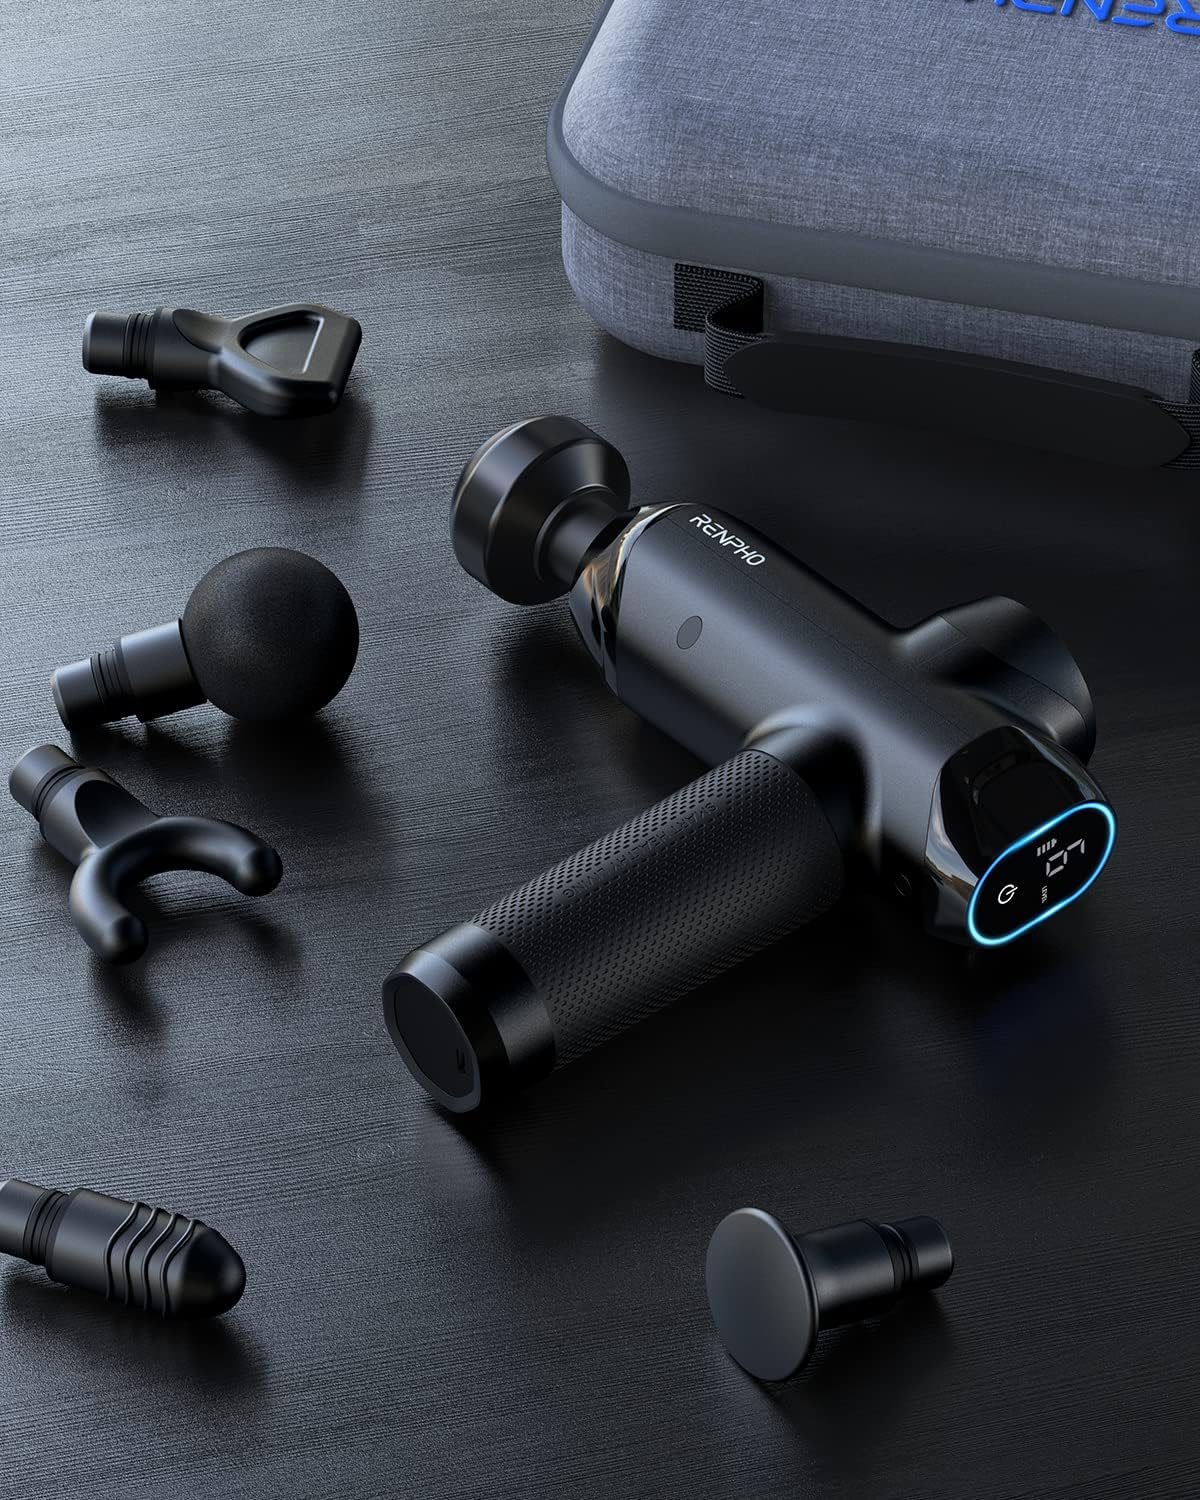 A black Power Massage Gun with various attachments and a carrying case on a dark textured surface, ideal for health and fitness.